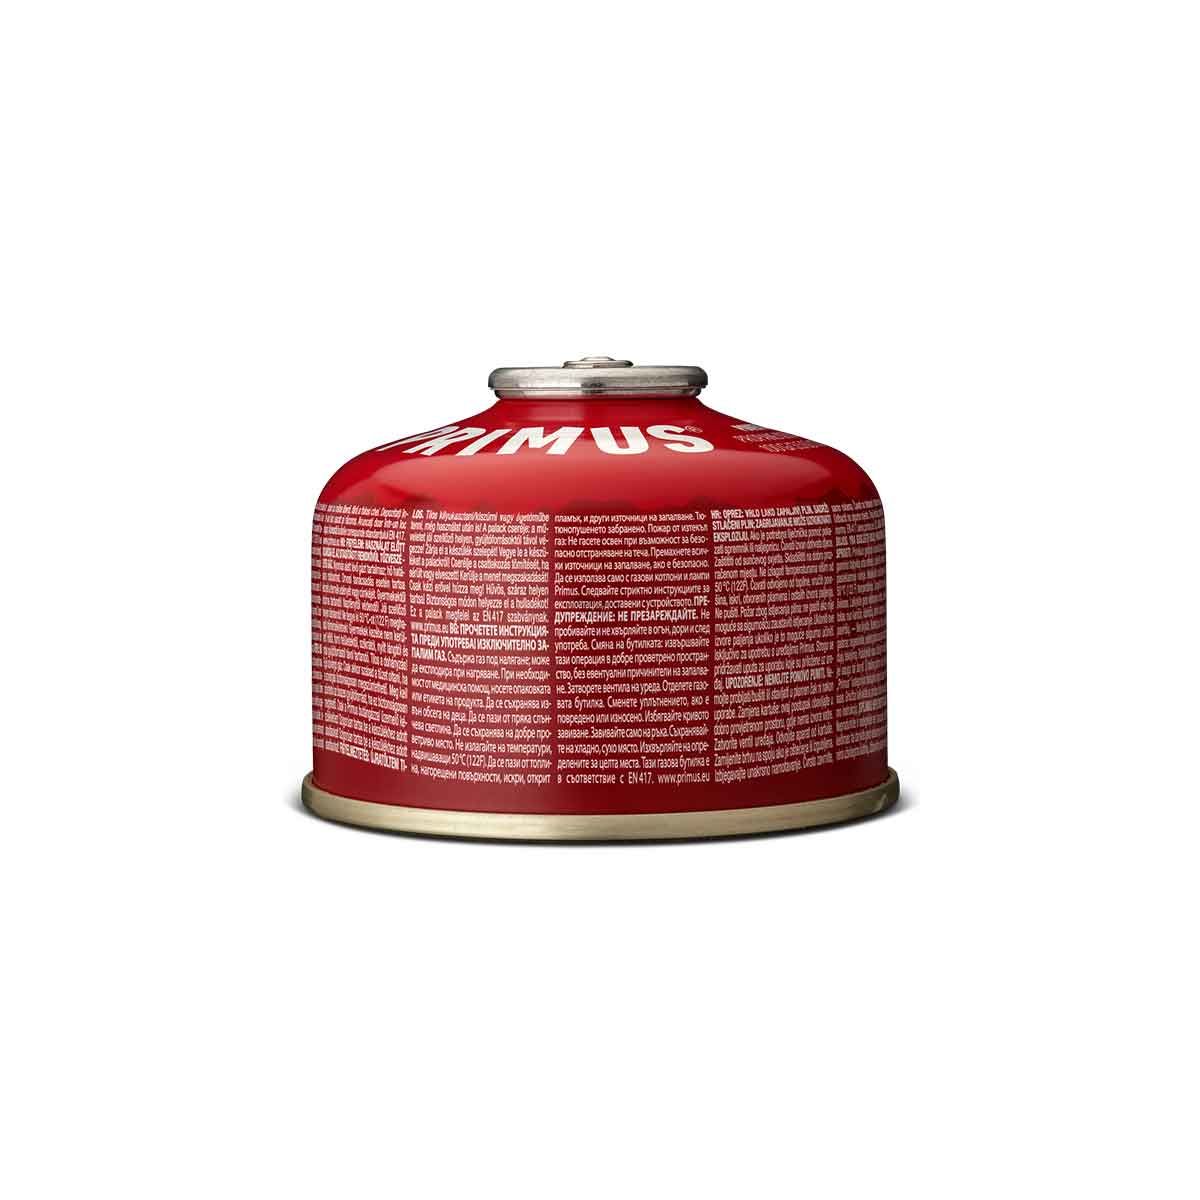 Primus Power gas canister - 100g